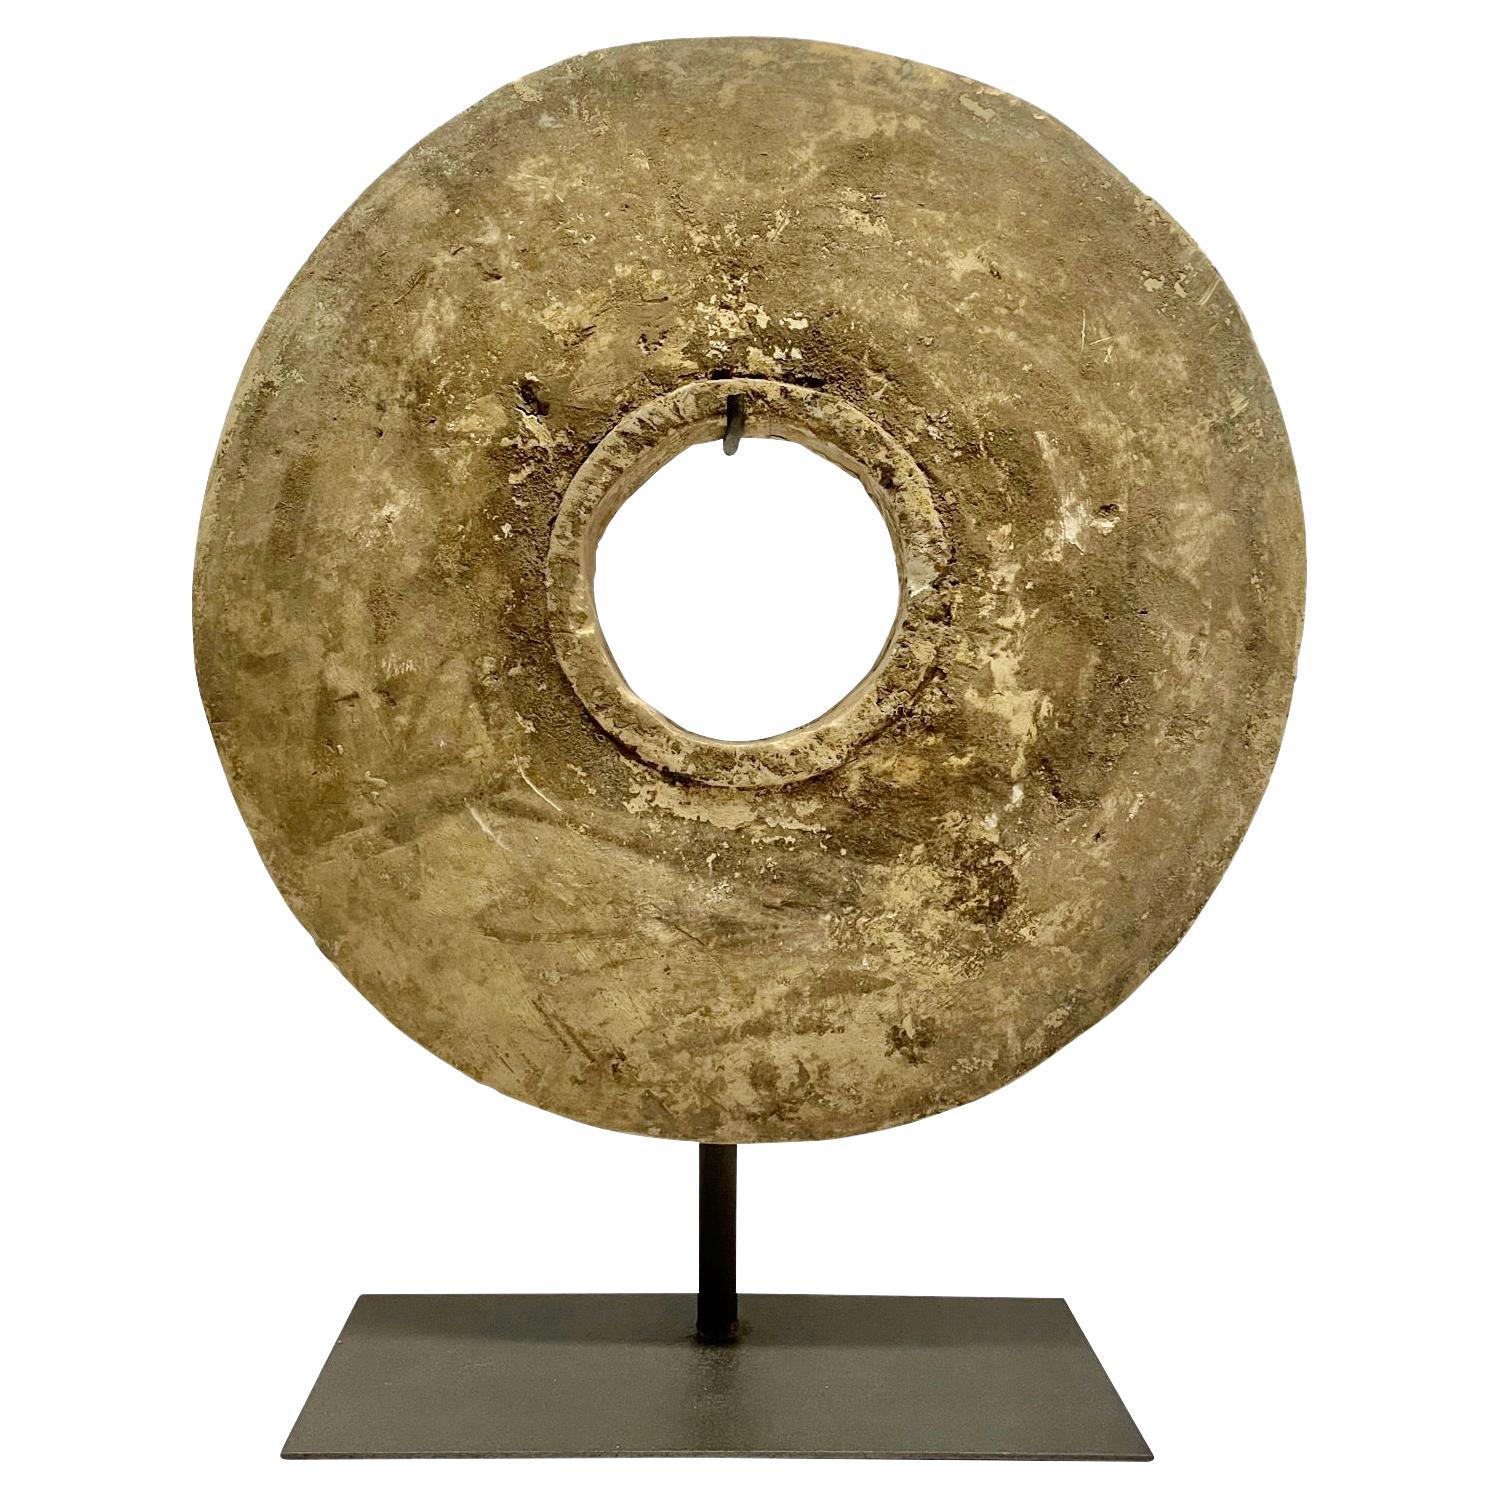 Weathered Stone Architectural Disc Sculpture, Indonesia, 1920s For Sale